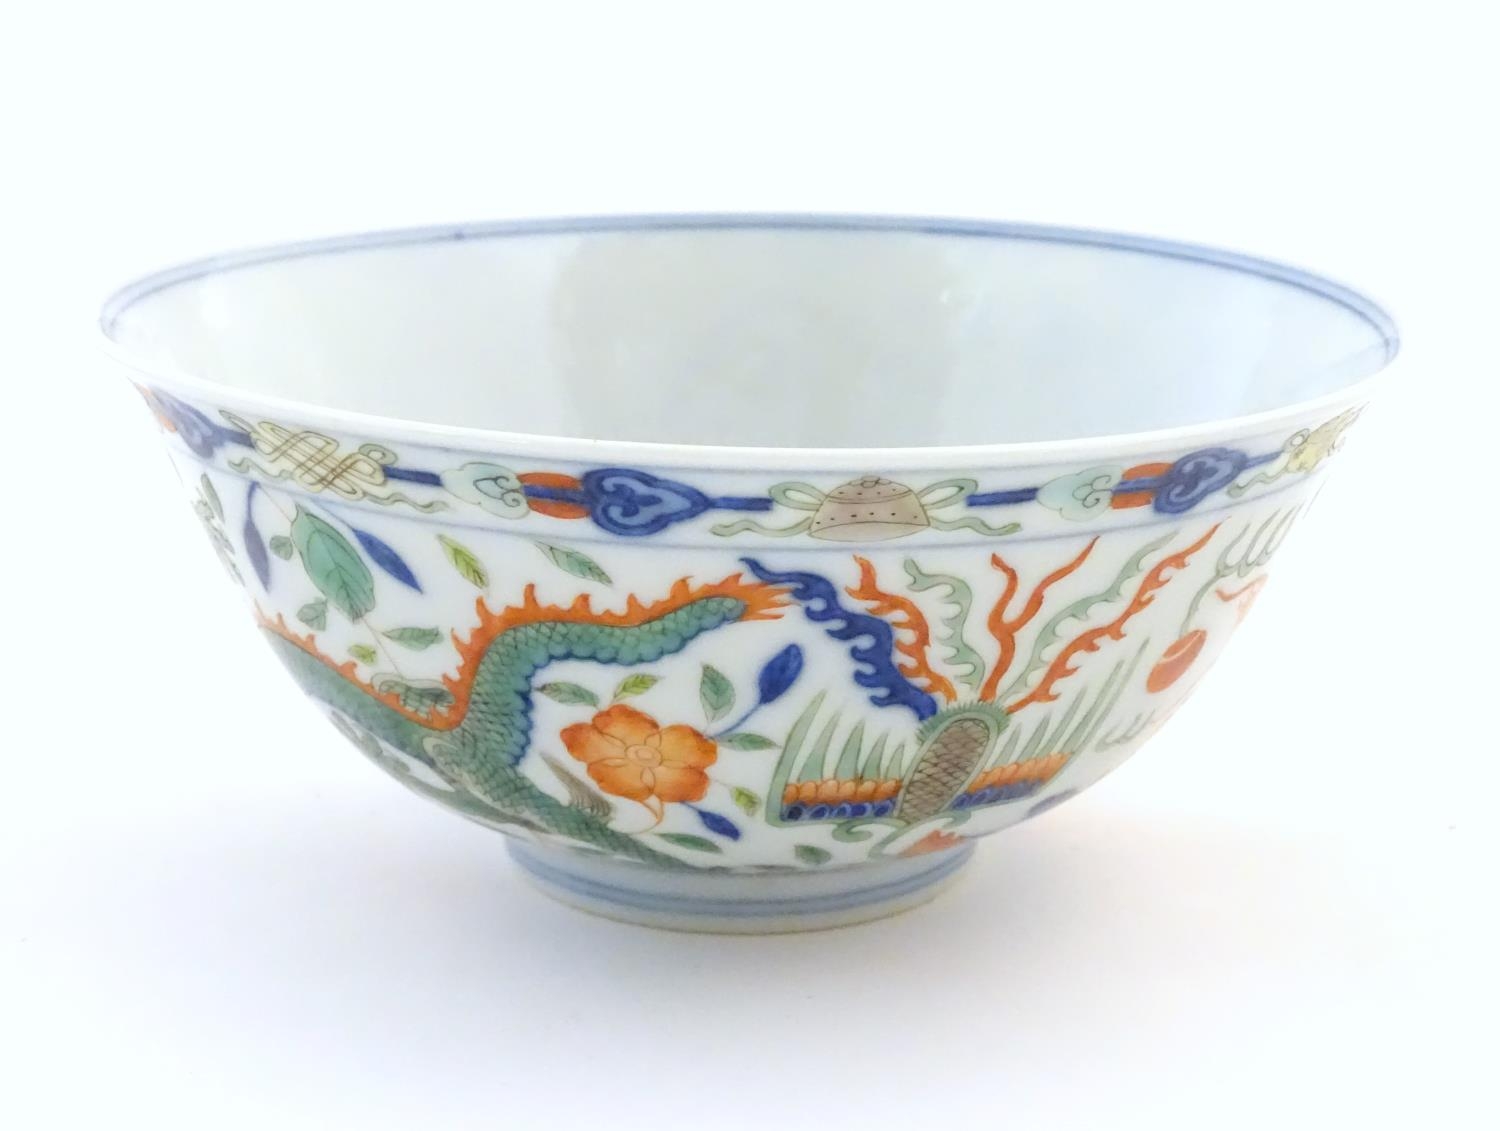 A Chinese bowl with dragon and flaming pearl detail, with flowers, foliate and stylised clouds. - Image 5 of 6